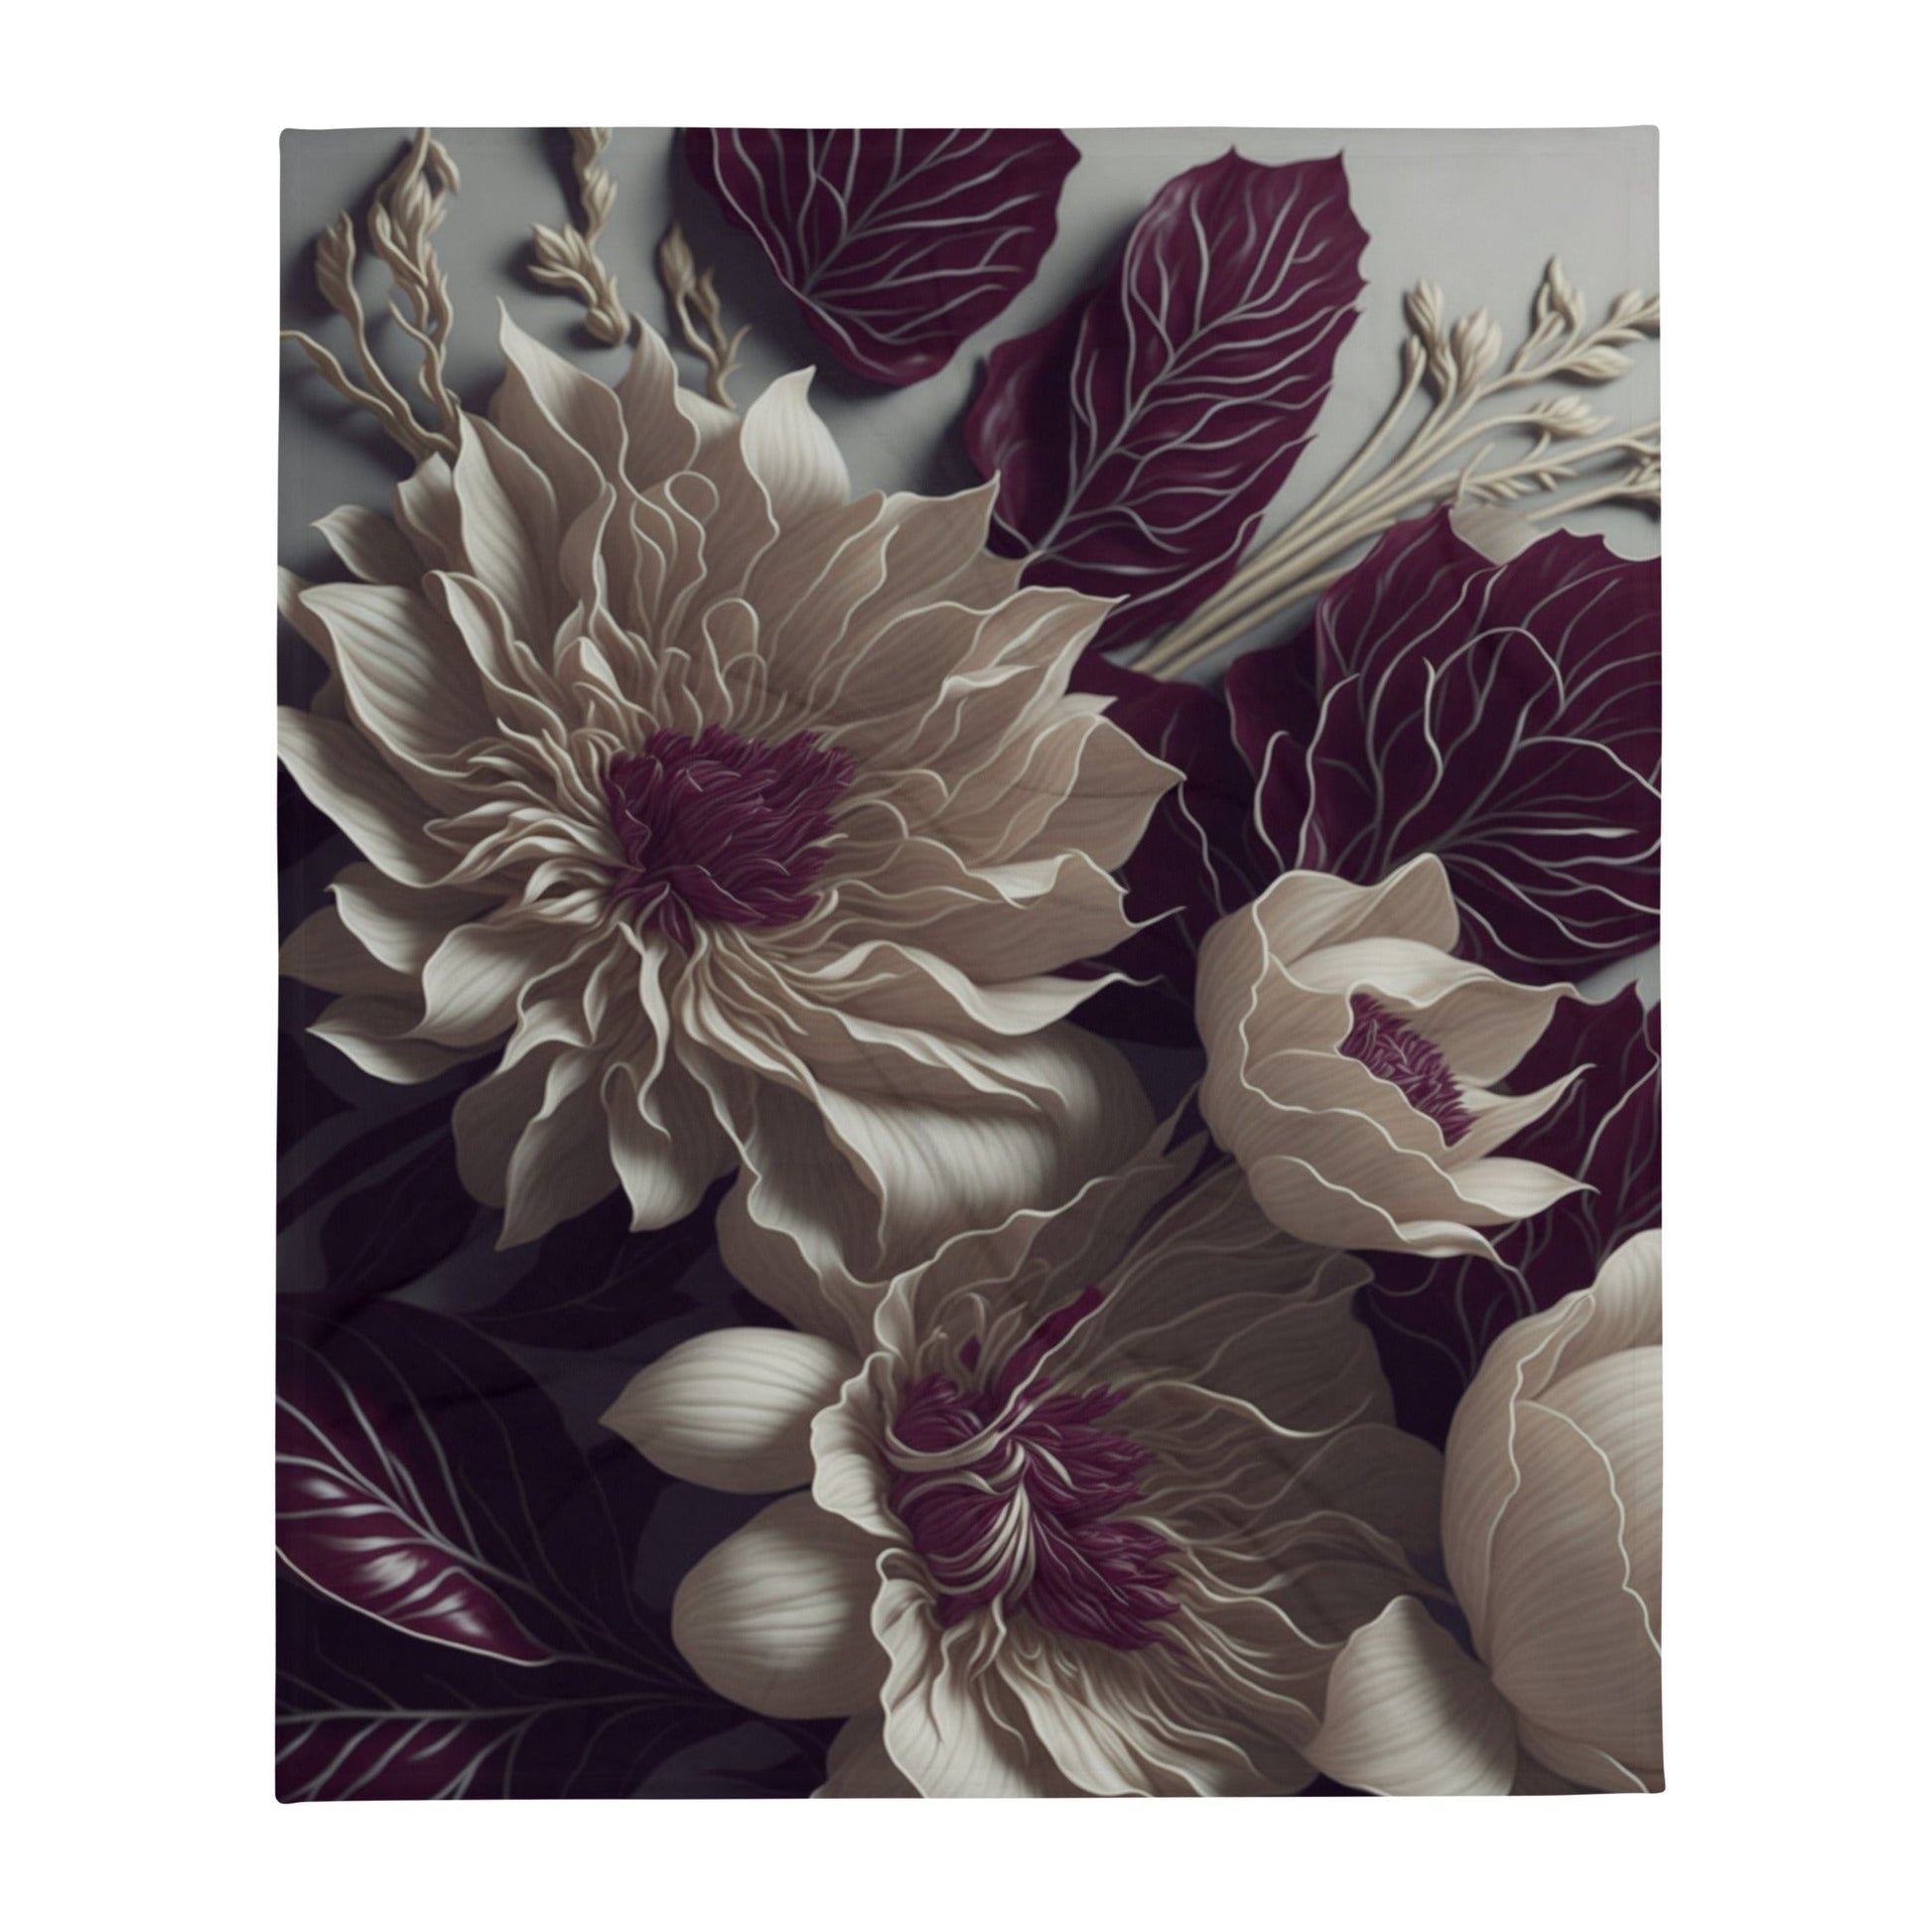 Enchanting Elegance: Ivory and Burgundy Flowers Throw Blanket Collection-THROW BLANKET-50″×60″-Dreamy Petals Unleashed-mysticalcherry